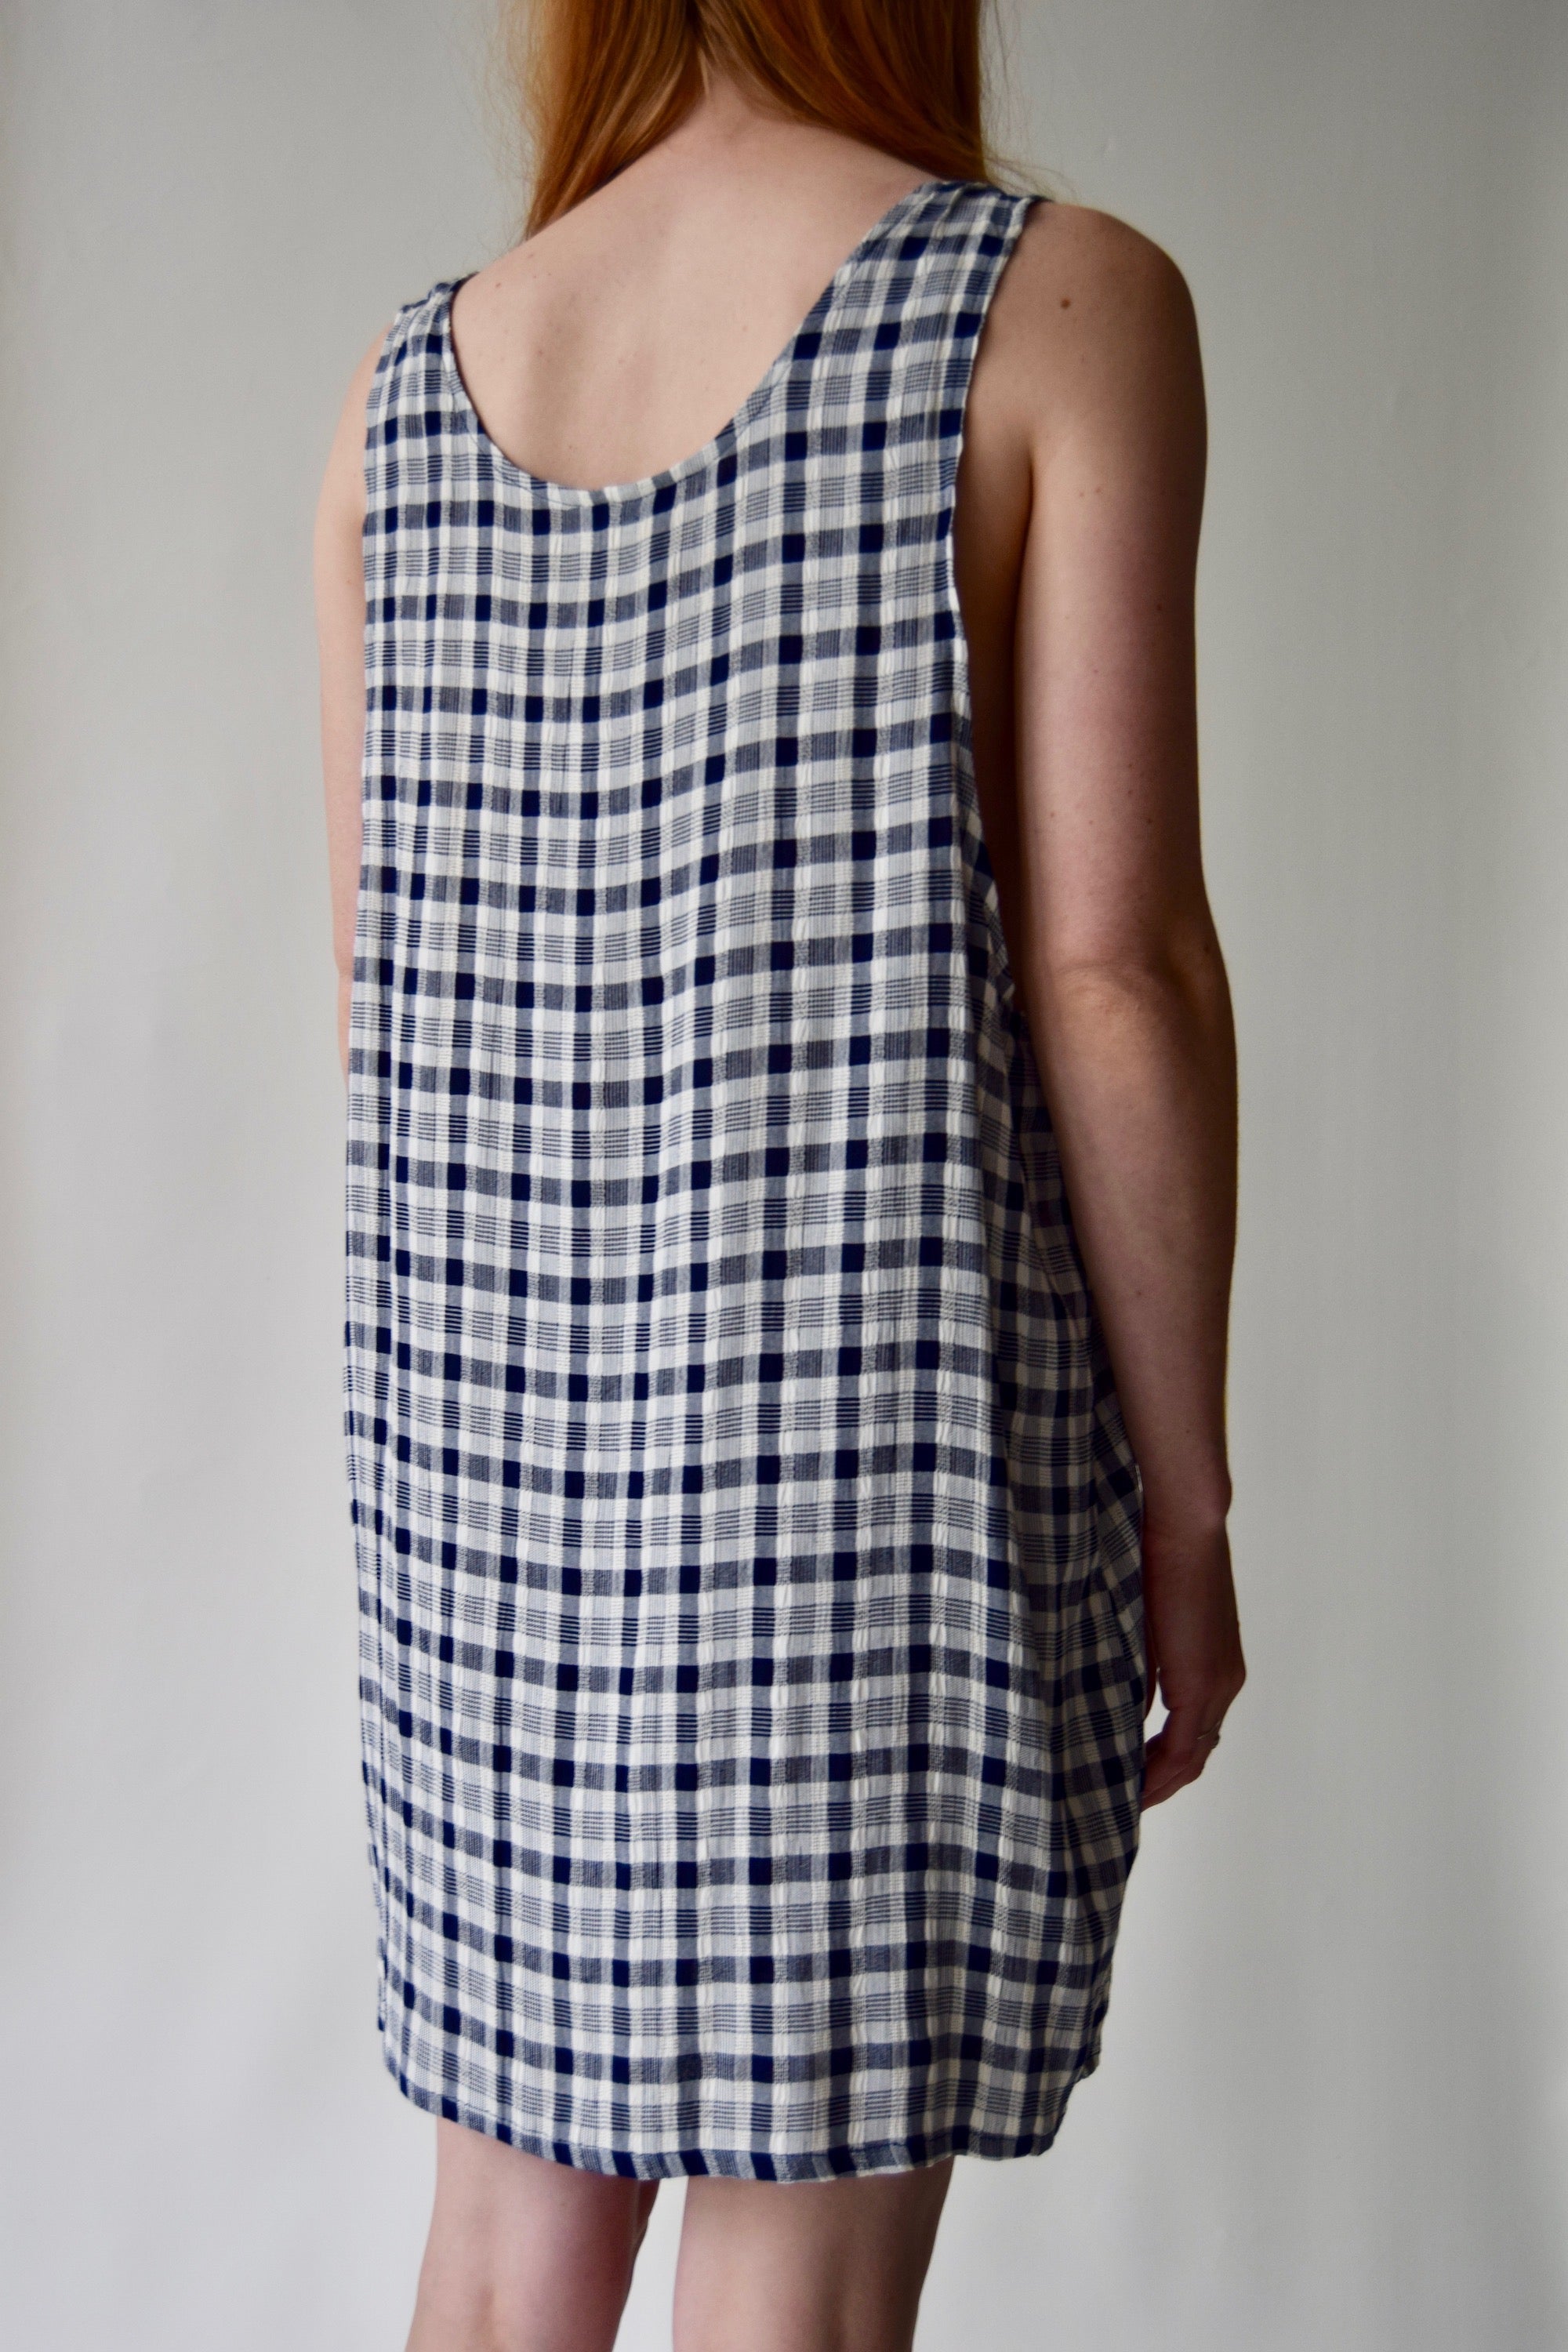 Navy and White Picnic Inspired Summer Dress